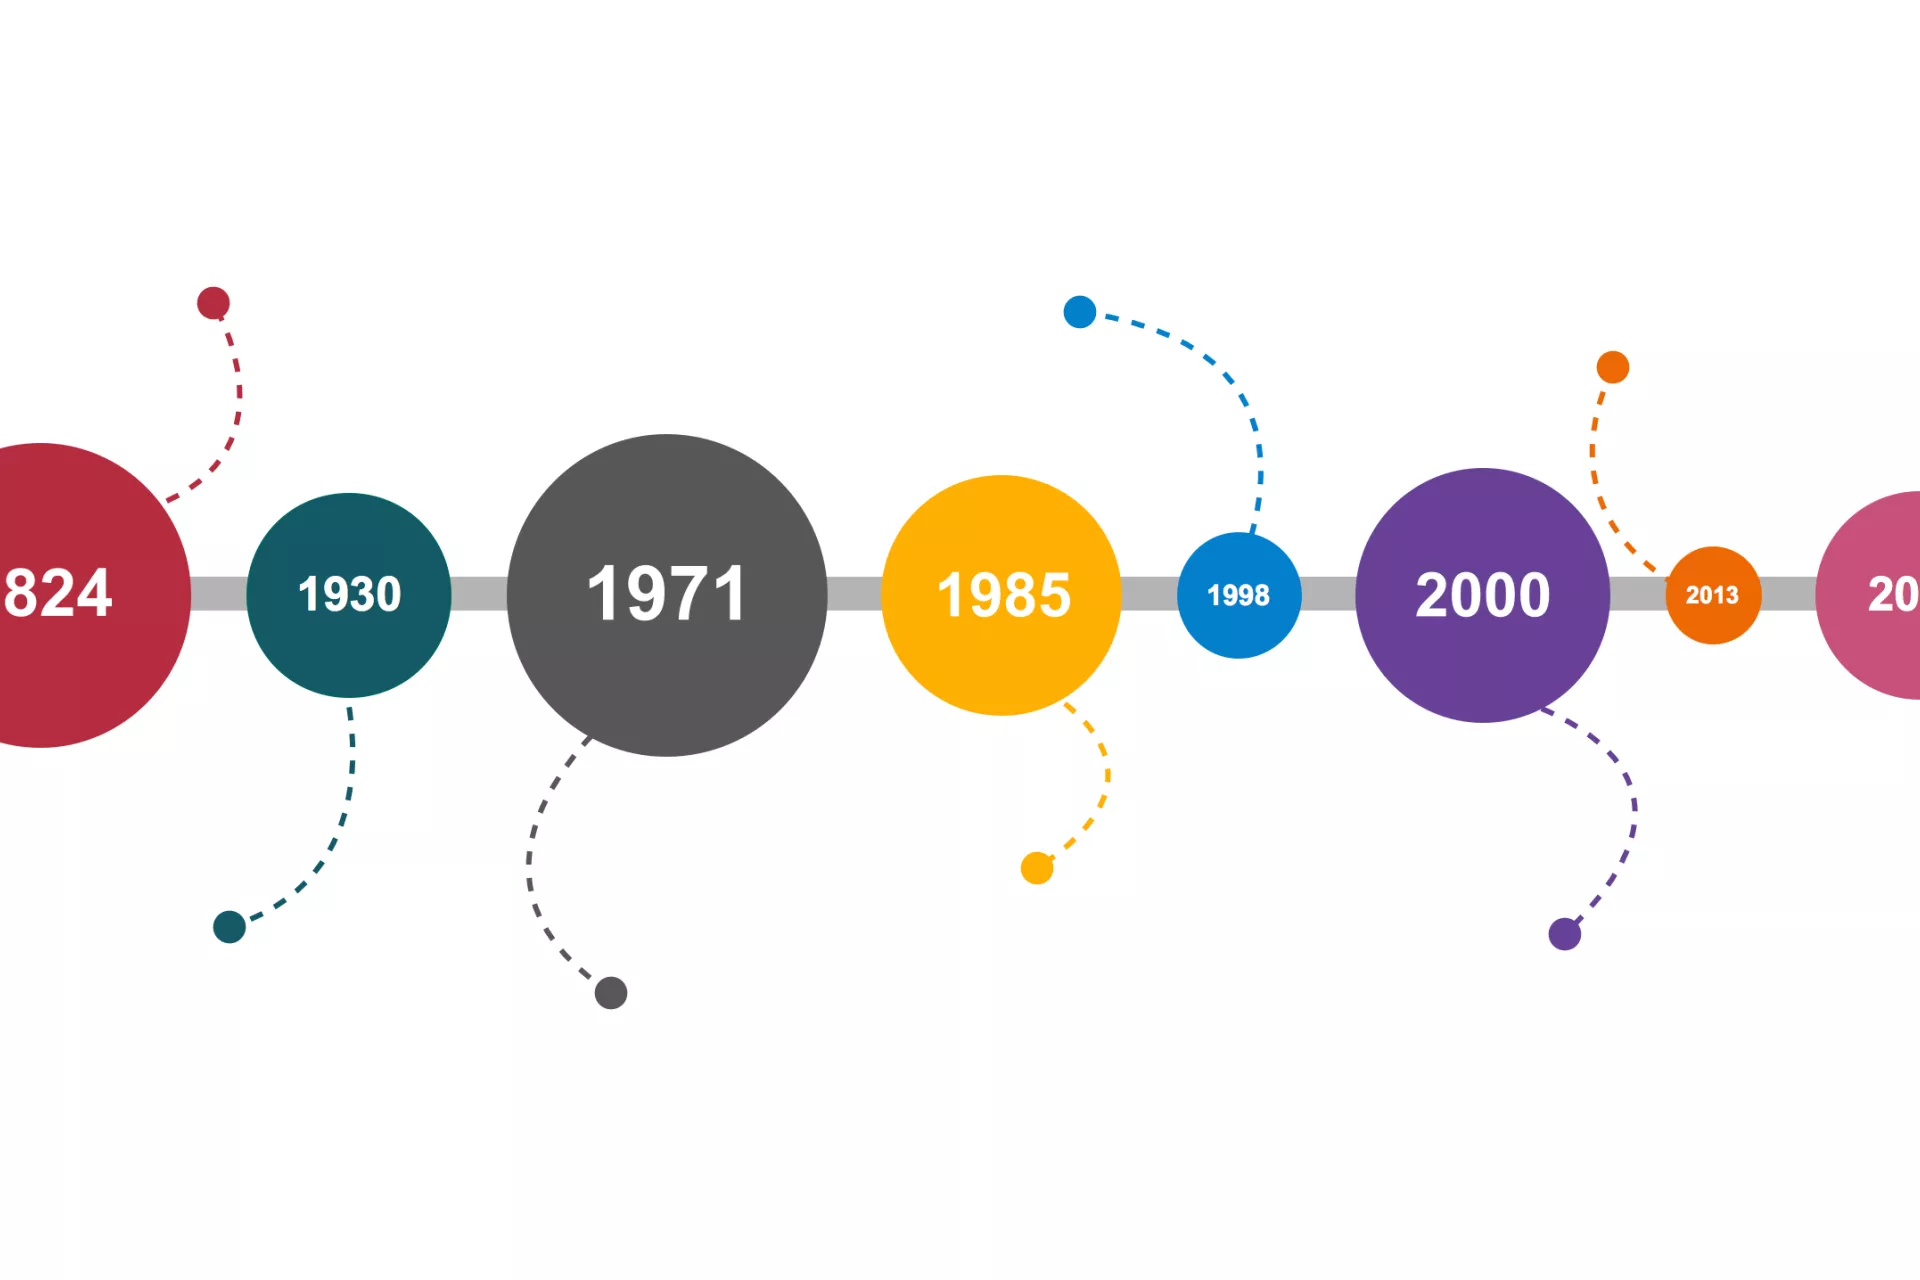 A timeline from the 1800s to now